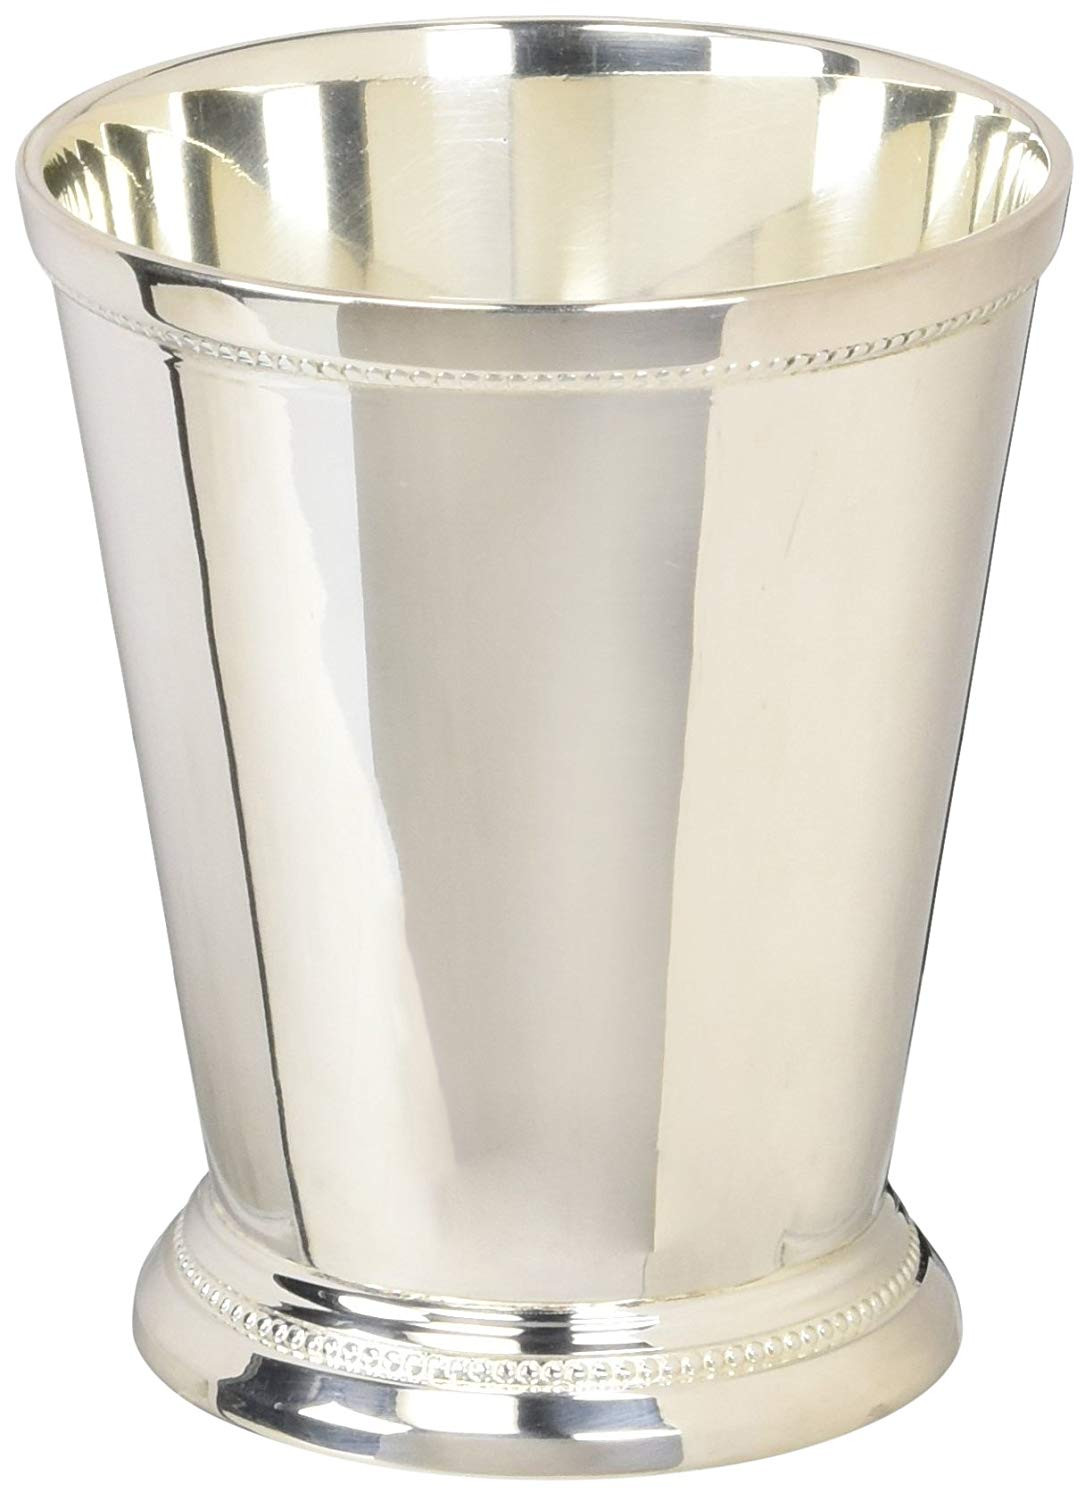 16 Popular Mint Julep Cup Vases wholesale 2024 free download mint julep cup vases wholesale of amazon com true fabrication 3268 old kentucky home mint julep cup within amazon com true fabrication 3268 old kentucky home mint julep cup multicolor home k